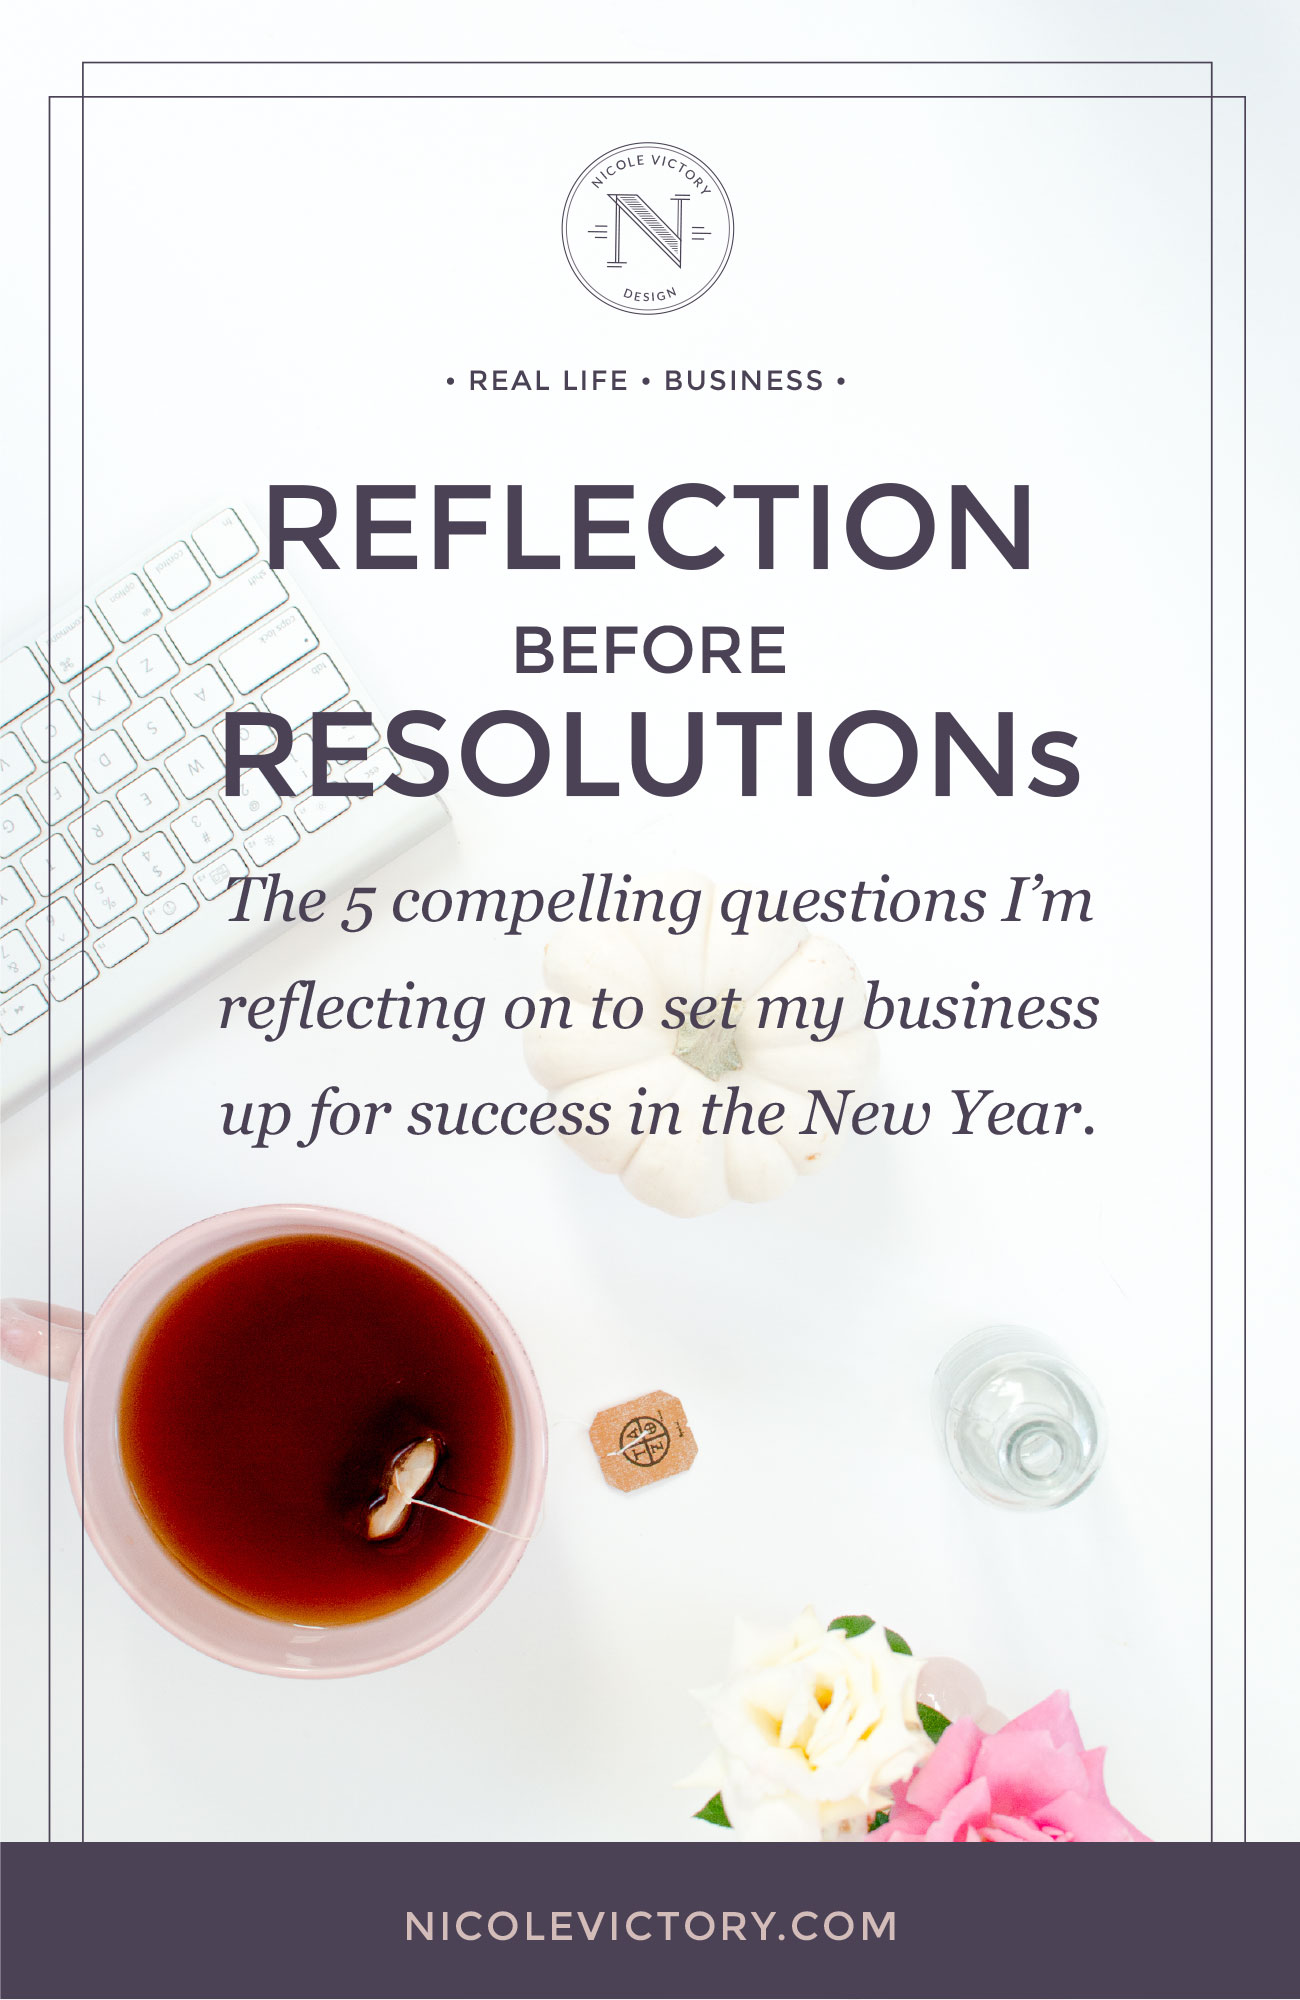 Reflection Before Resolutions 2017 | 5 compelling questions I'm reflecting on to set my business up for success in the New Year | Nicole Victory Design